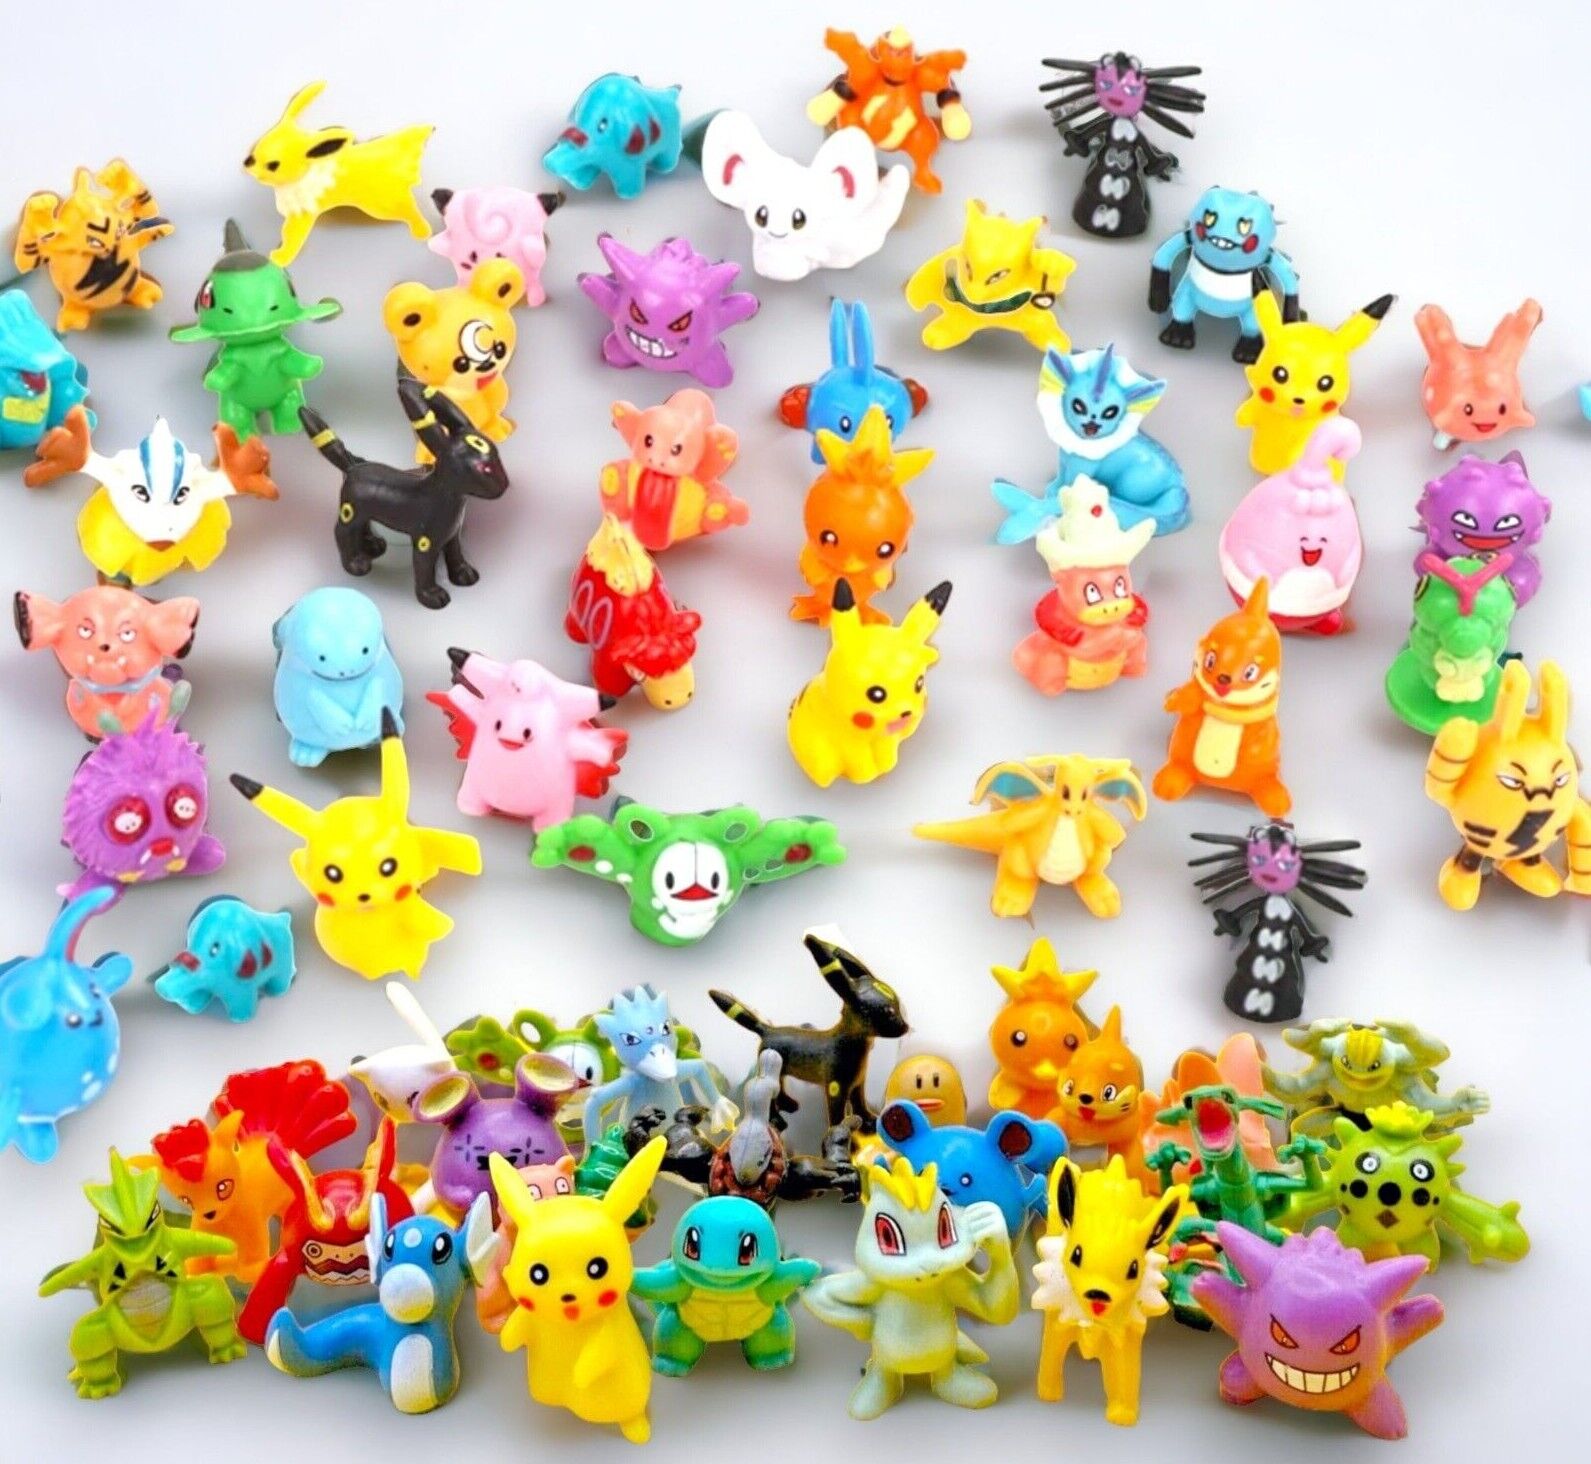 24/144 pcs Mini Action Figures Figurines Toys Kids Gift Cake Topper Party Series